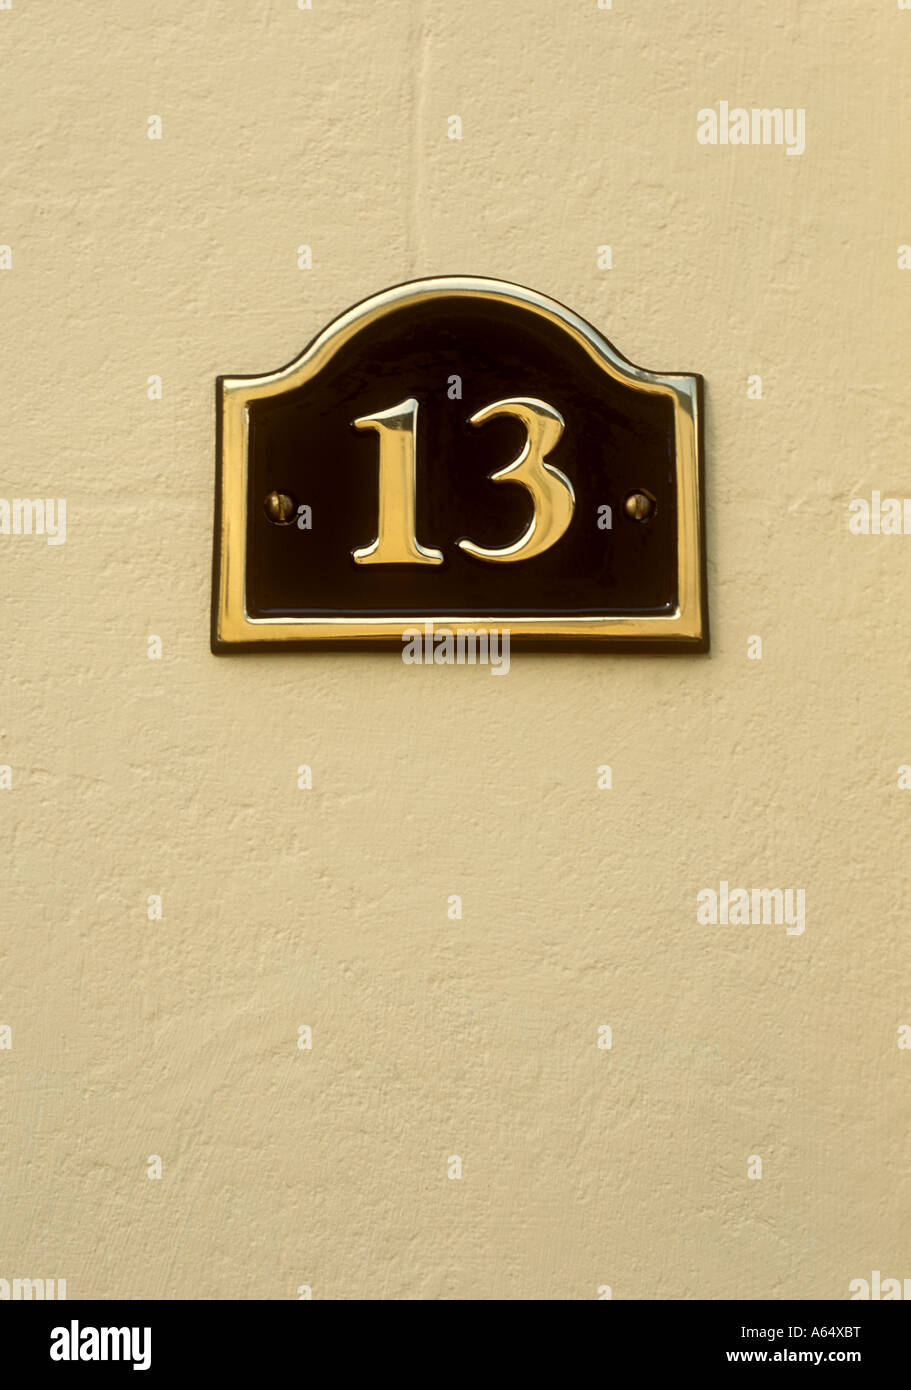 House number 13 plaque Stock Photo